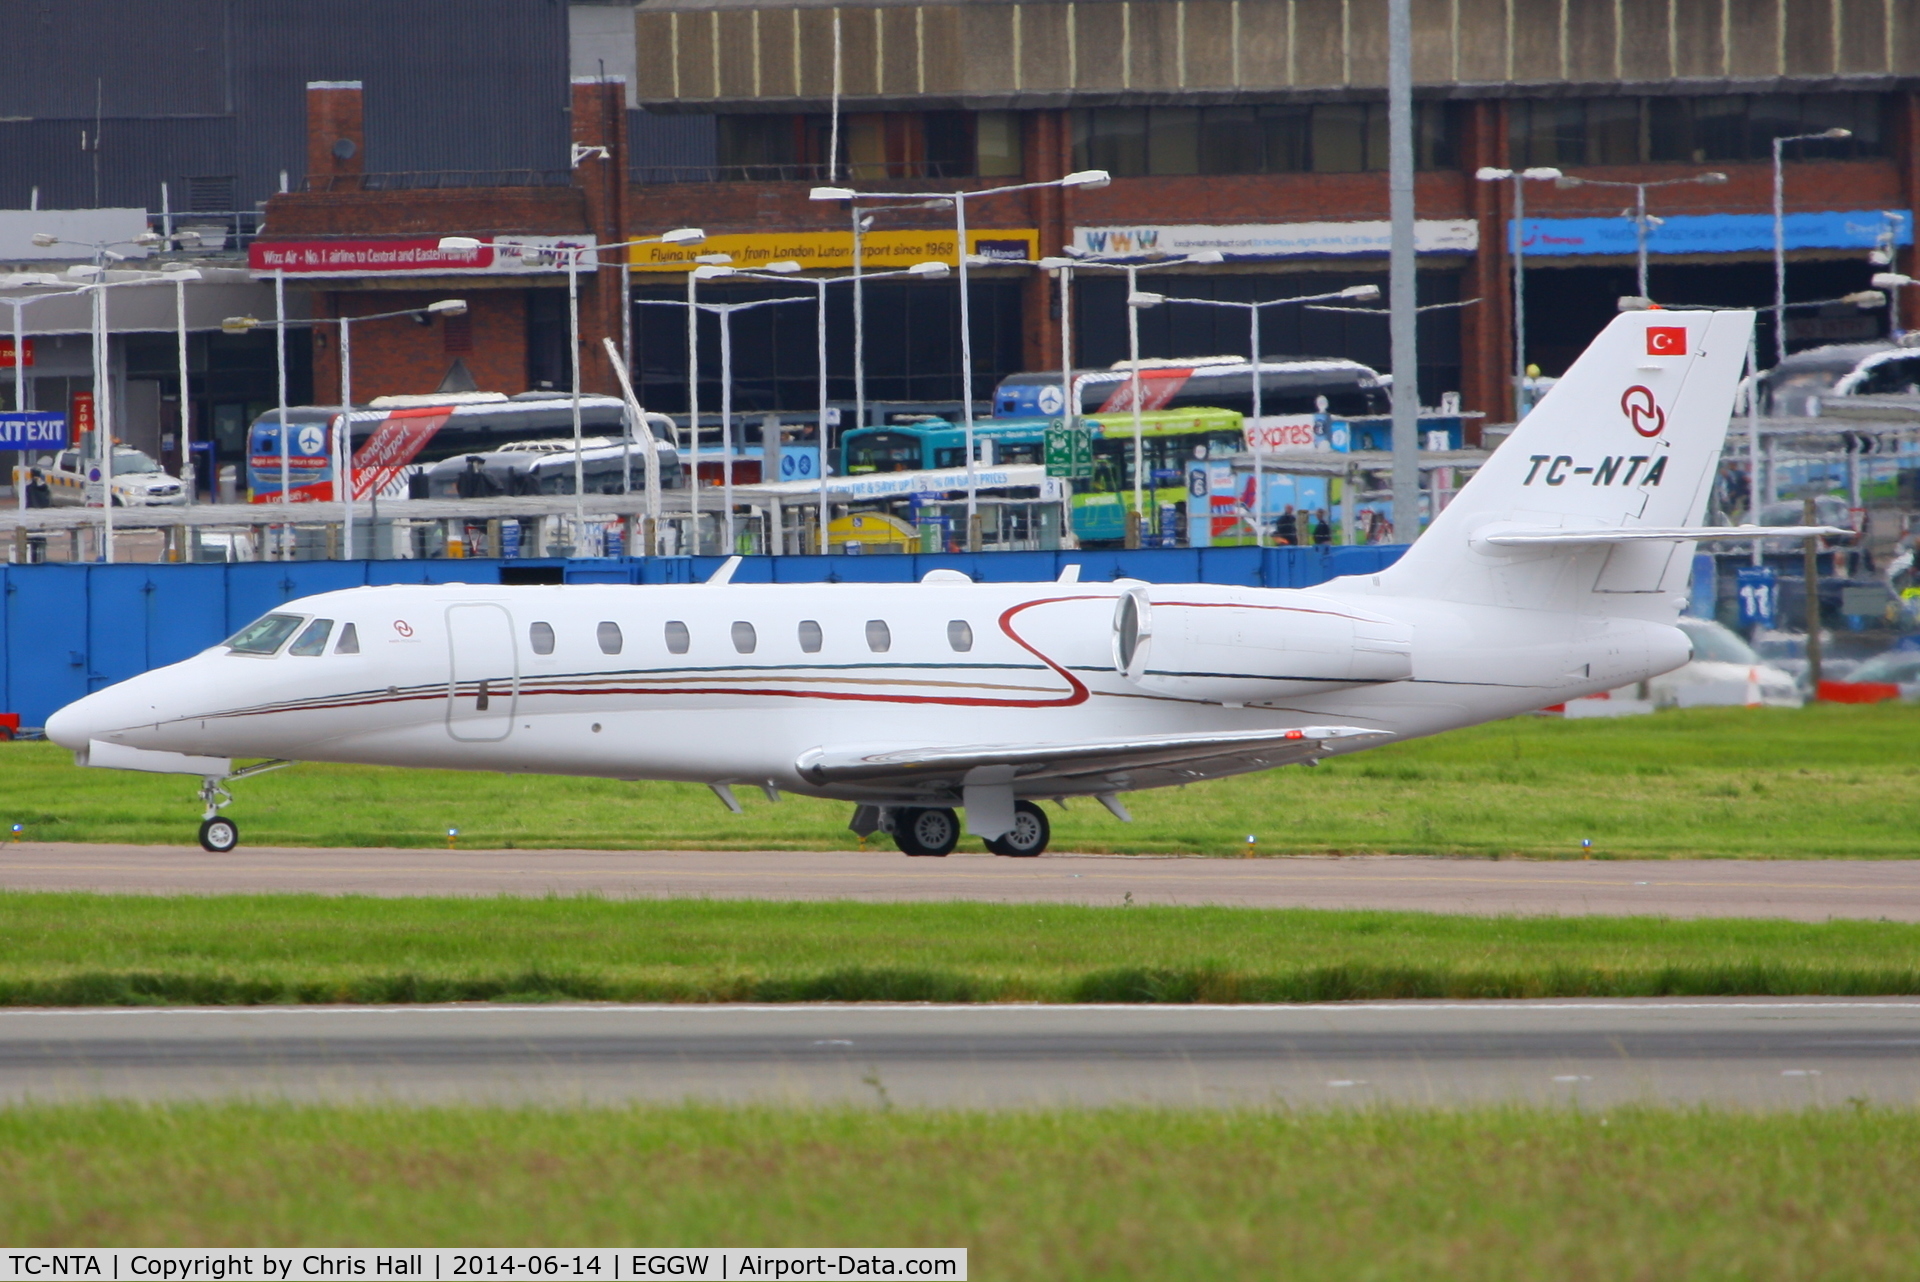 TC-NTA, 2012 Cessna 680 Citation Sovereign C/N 680-0343, privately owned